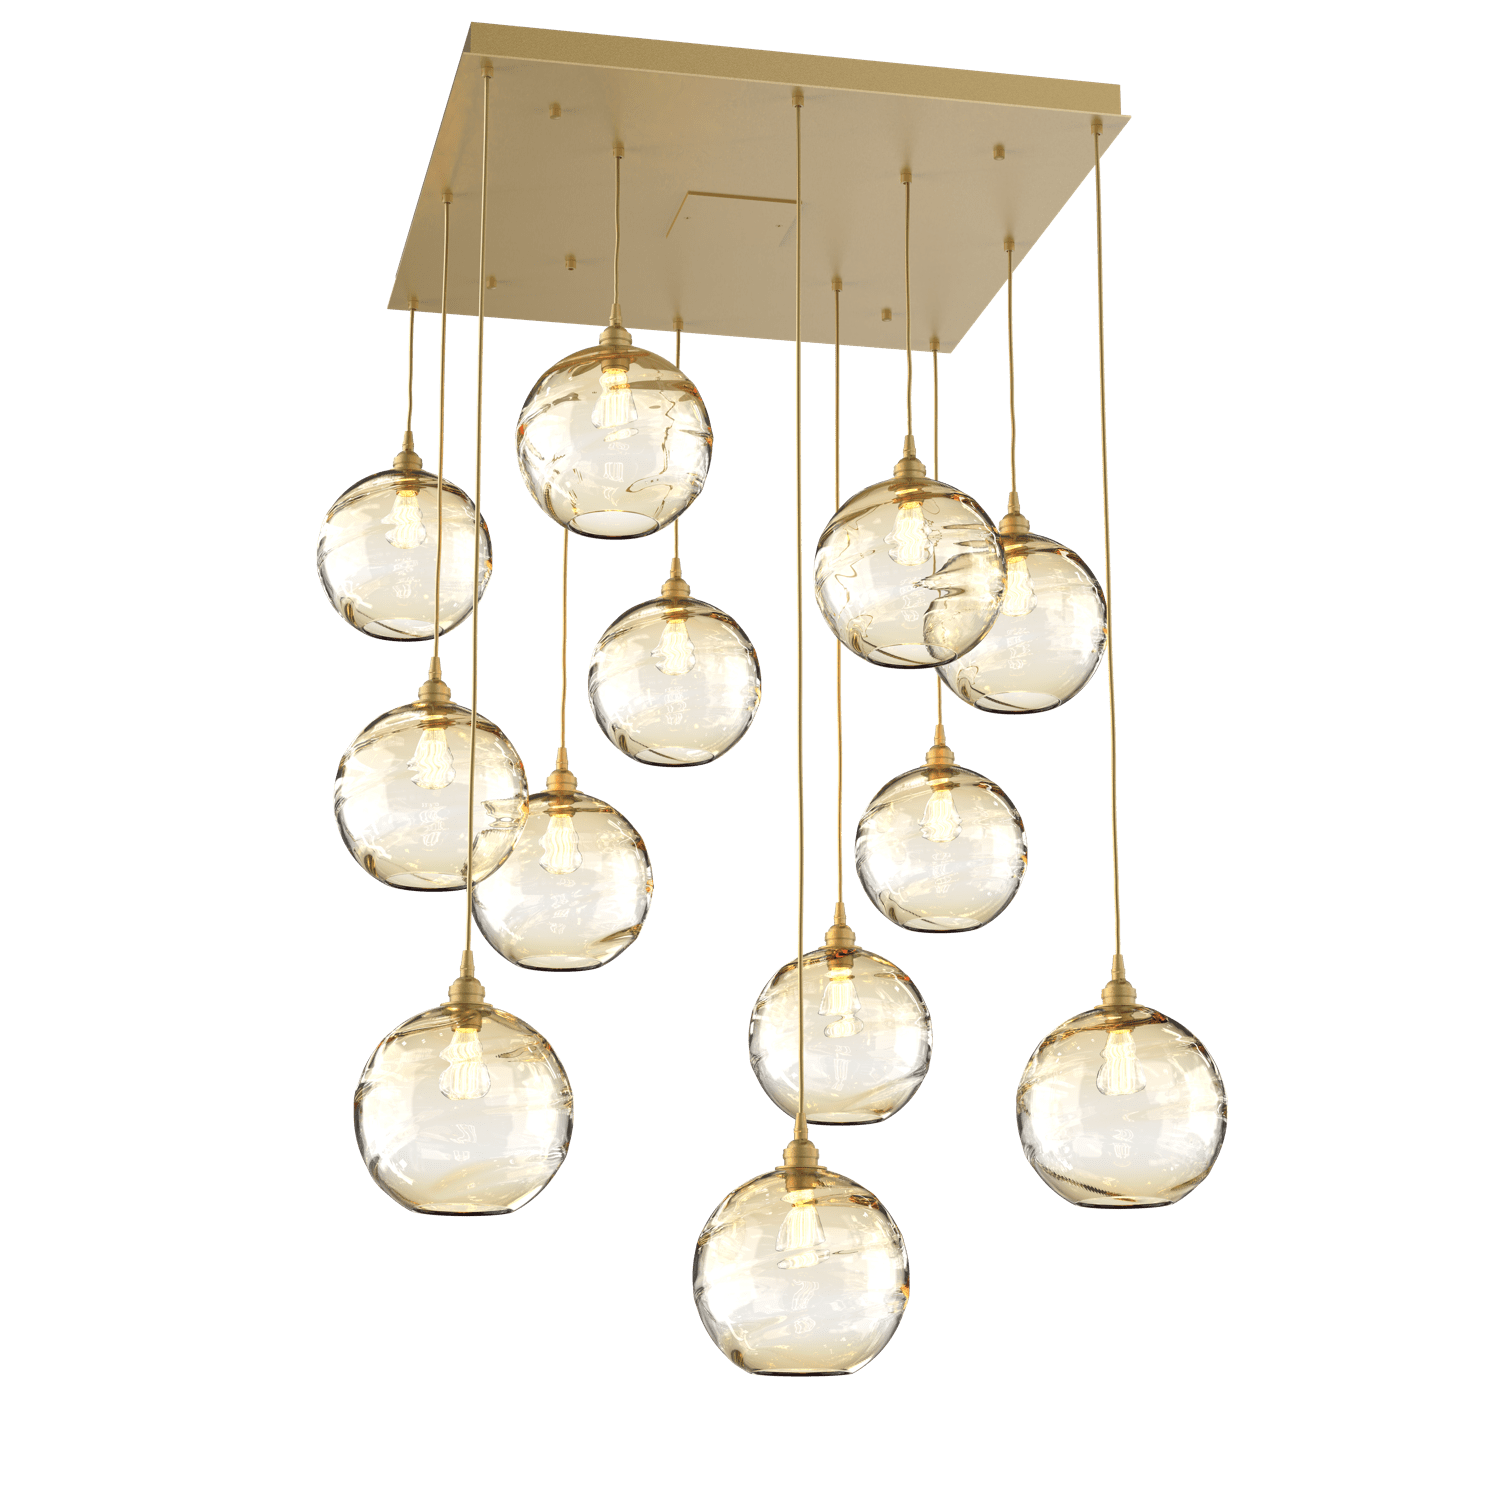 CHB0047-12-GB-OA-Hammerton-Studio-Optic-Blown-Glass-Terra-12-light-square-pendant-chandelier-with-gilded-brass-finish-and-optic-amber-blown-glass-shades-and-incandescent-lamping